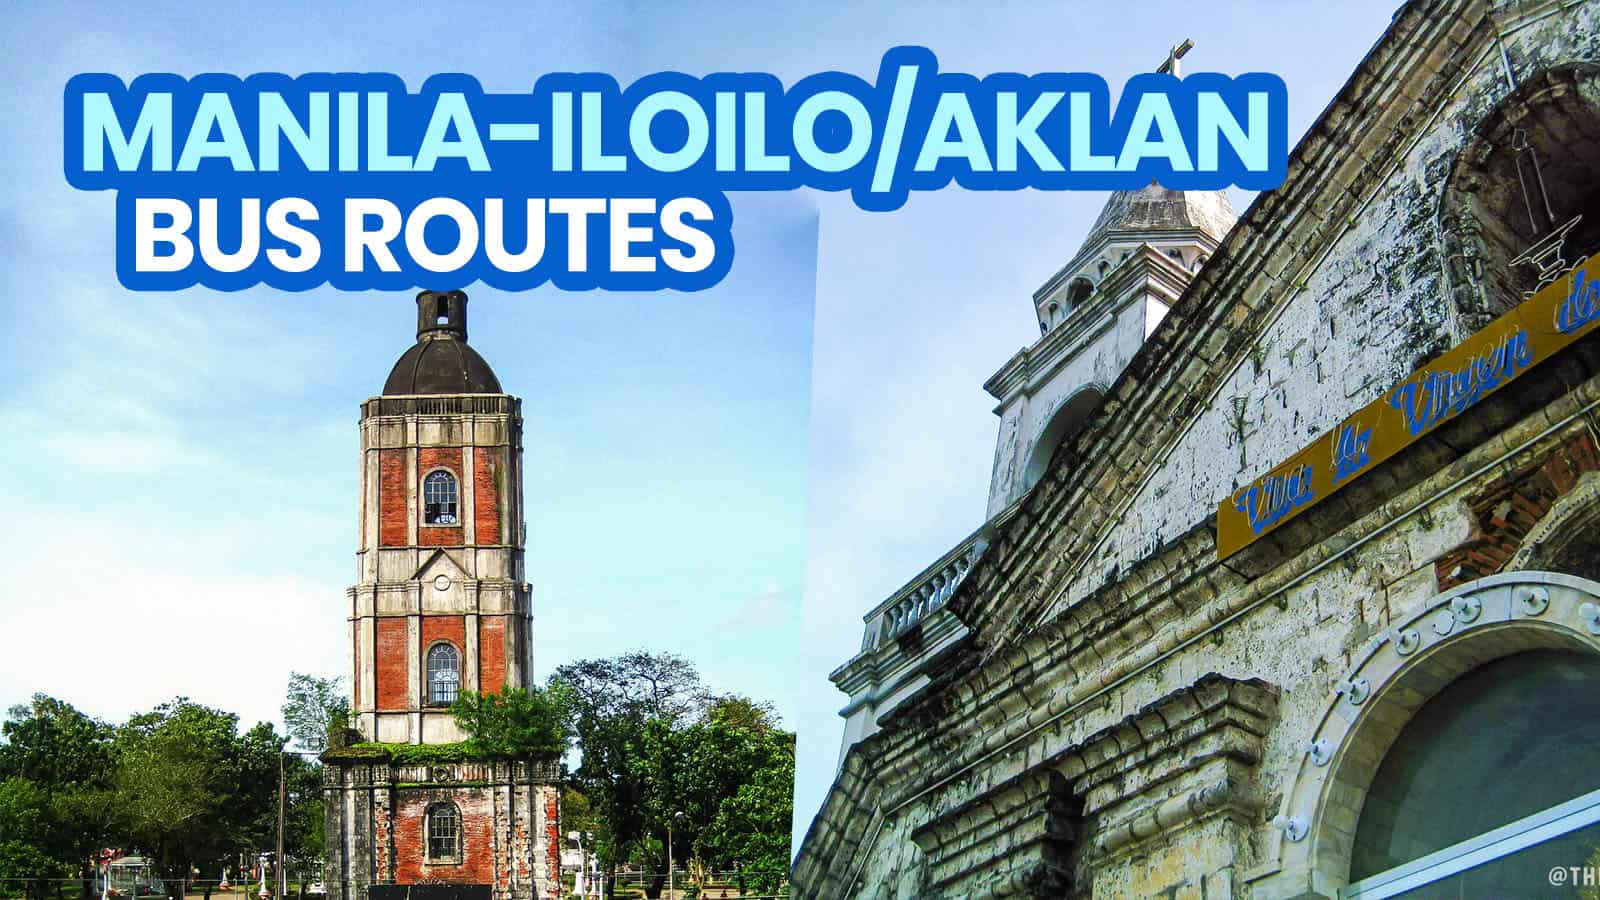 MANILA TO WESTERN VISAYAS by BUS: Operational Bus Companies and Routes to Iloilo, Aklan & Capiz